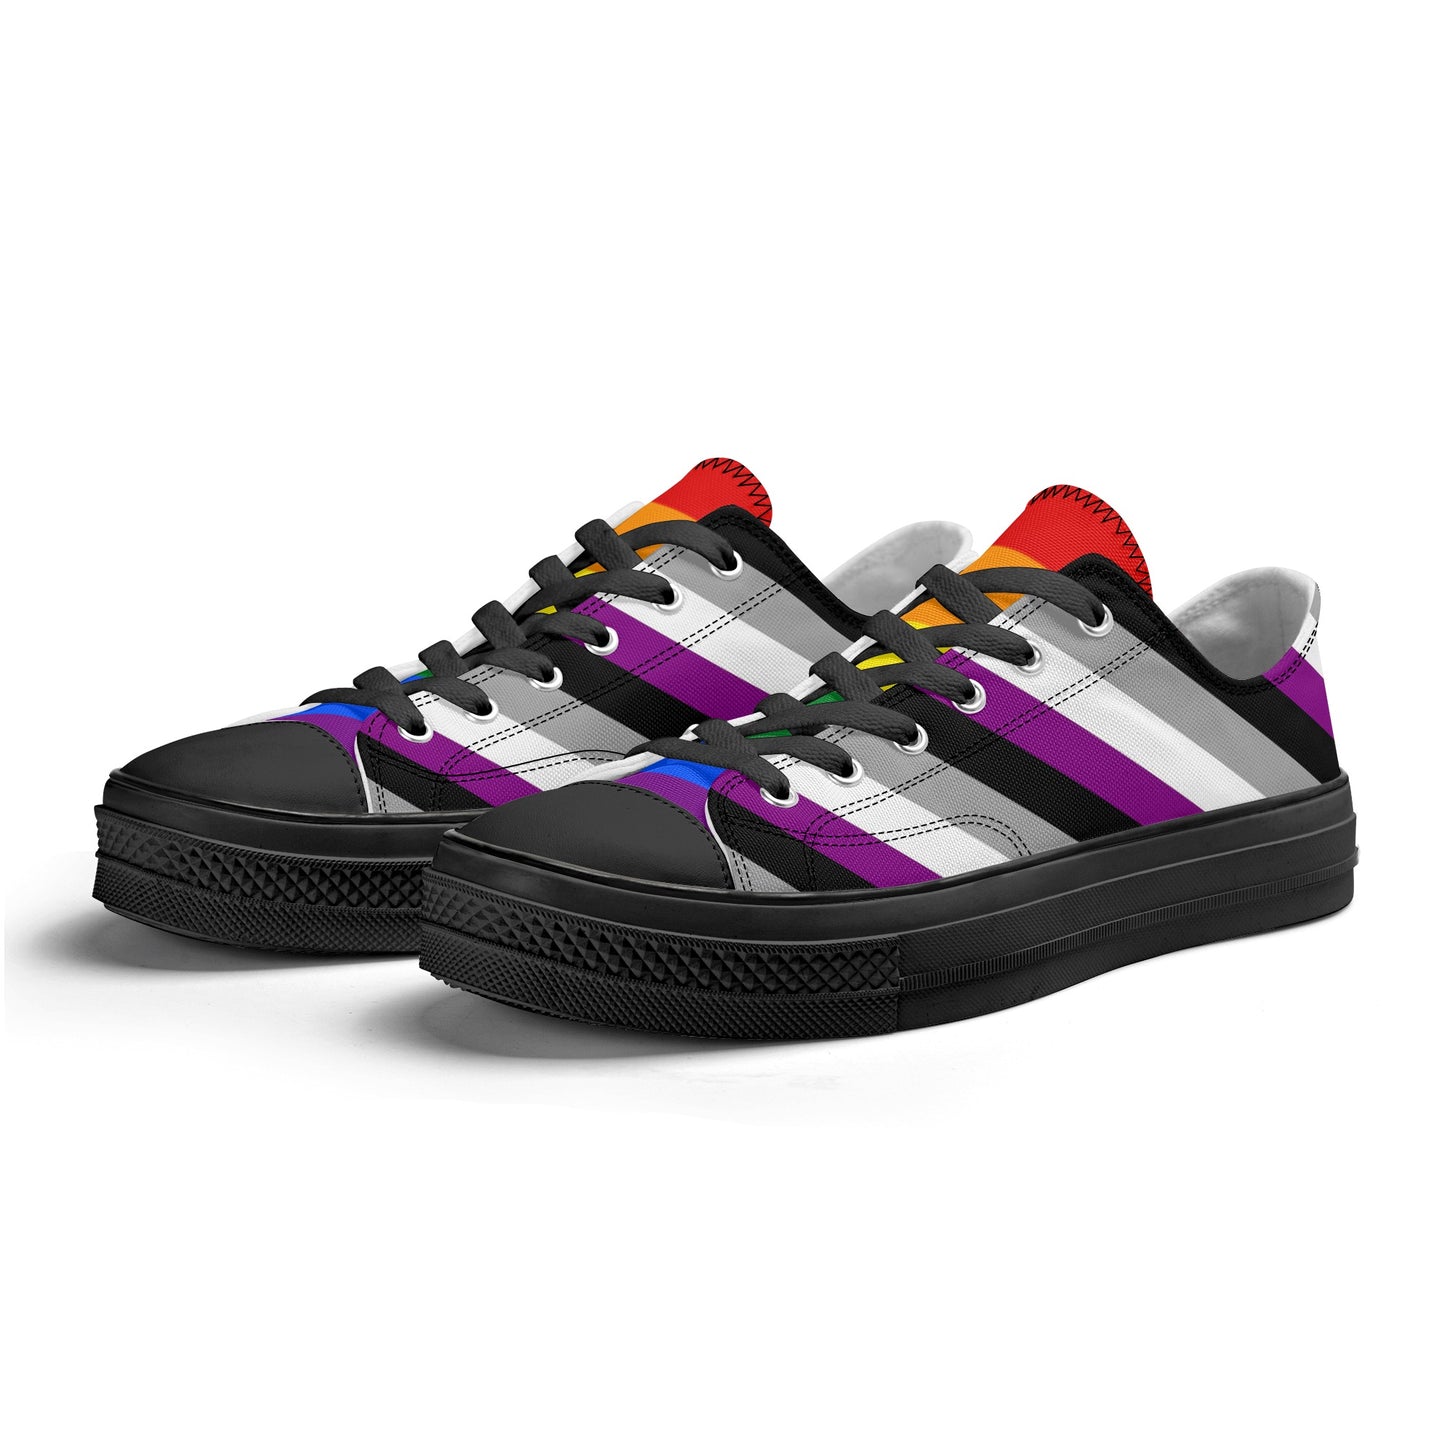 Asexual Pride Collection - Mens Classic Low Top Canvas Shoes for the LGBTQIA+ community